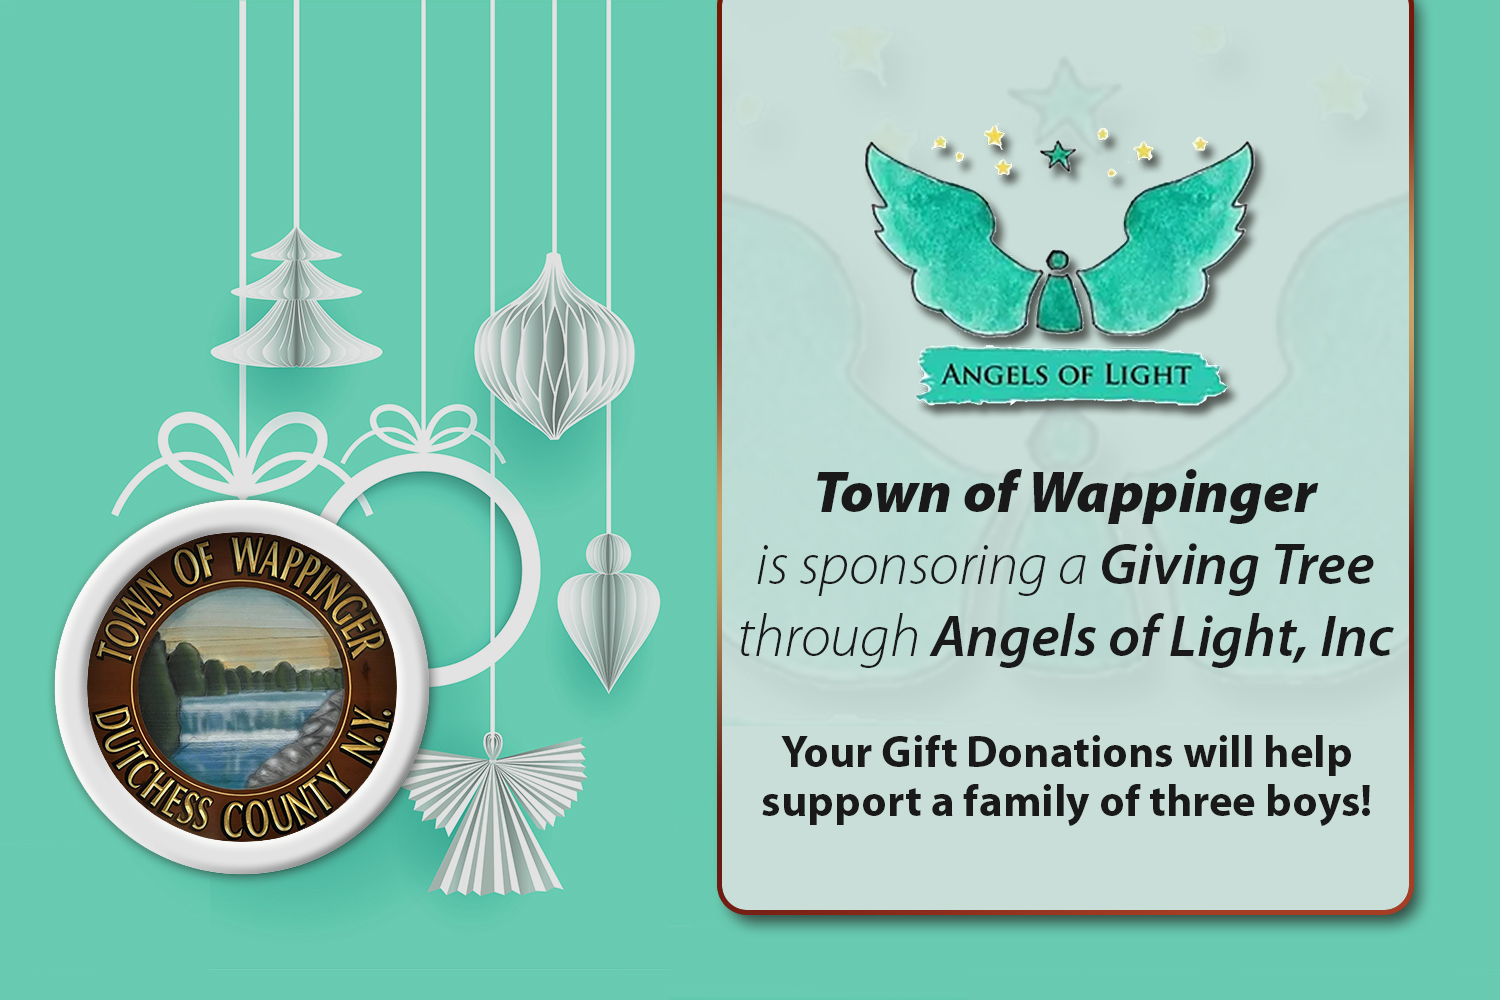 Wappinger Town Sponsors Giving Tree Through Angels of Light, Inc.